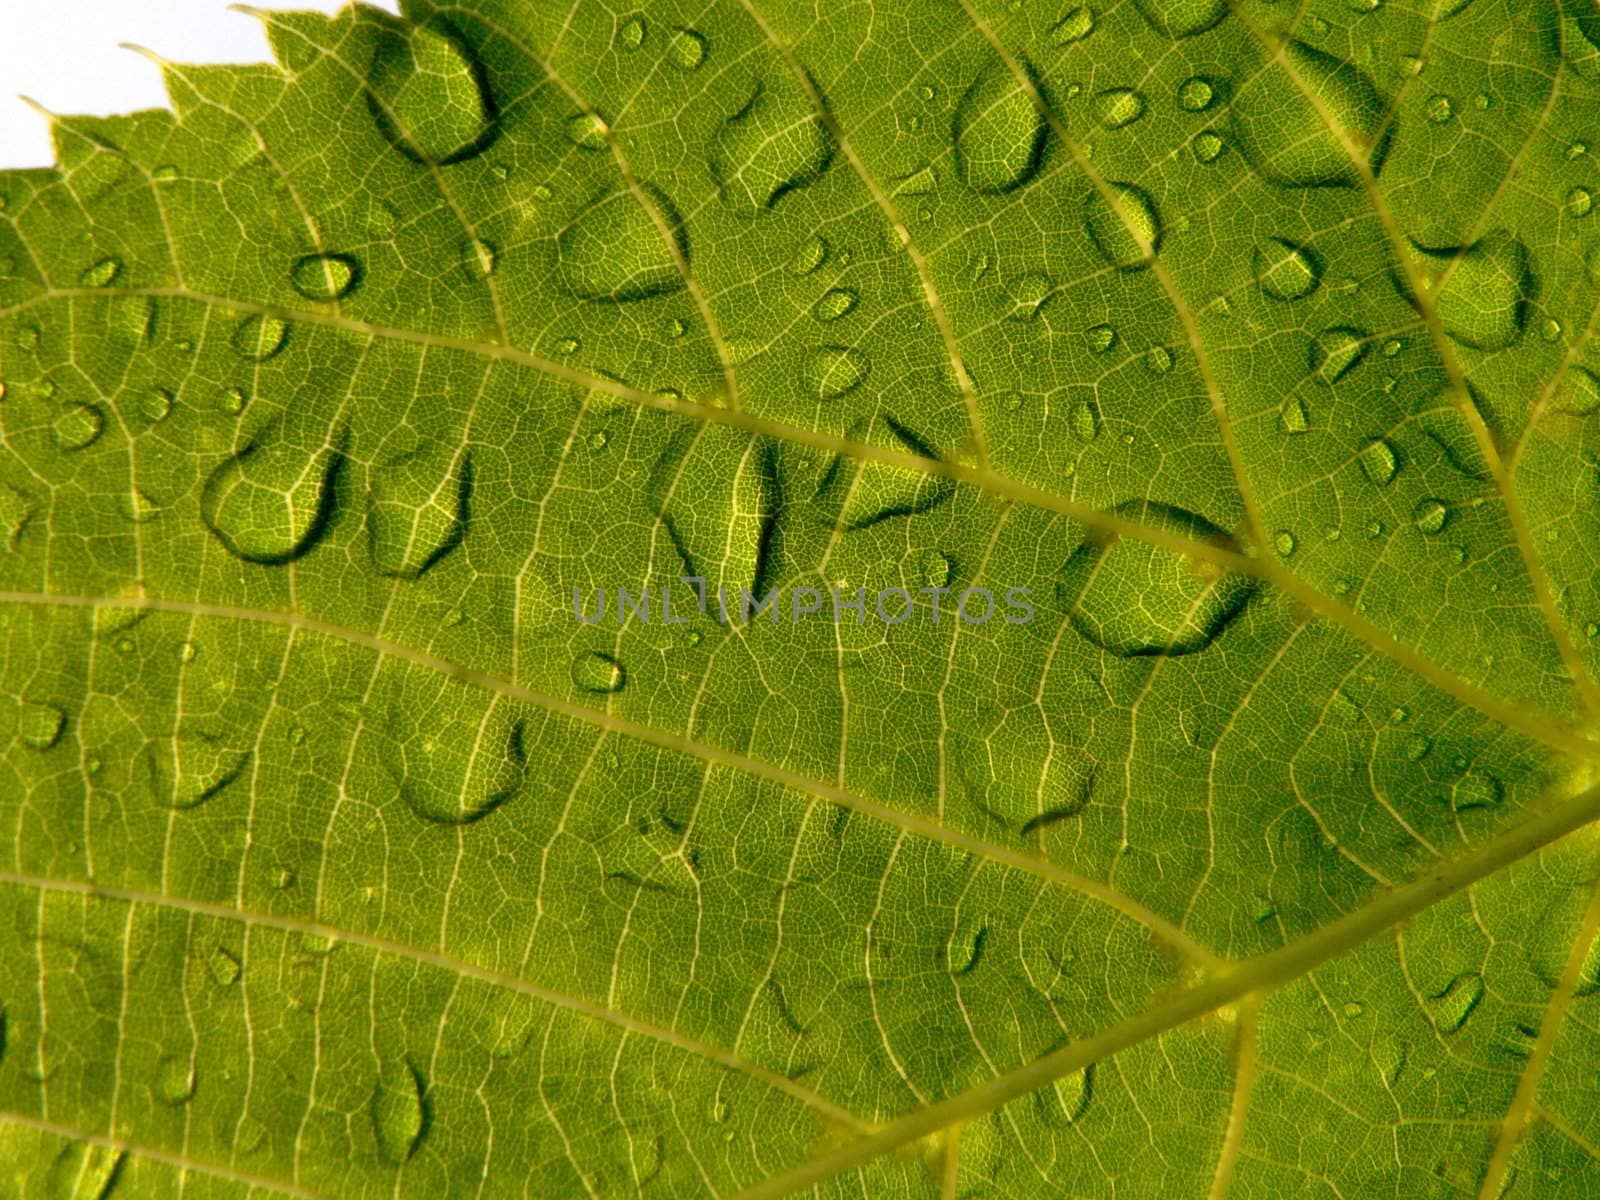 The Green leaf with drop of rain